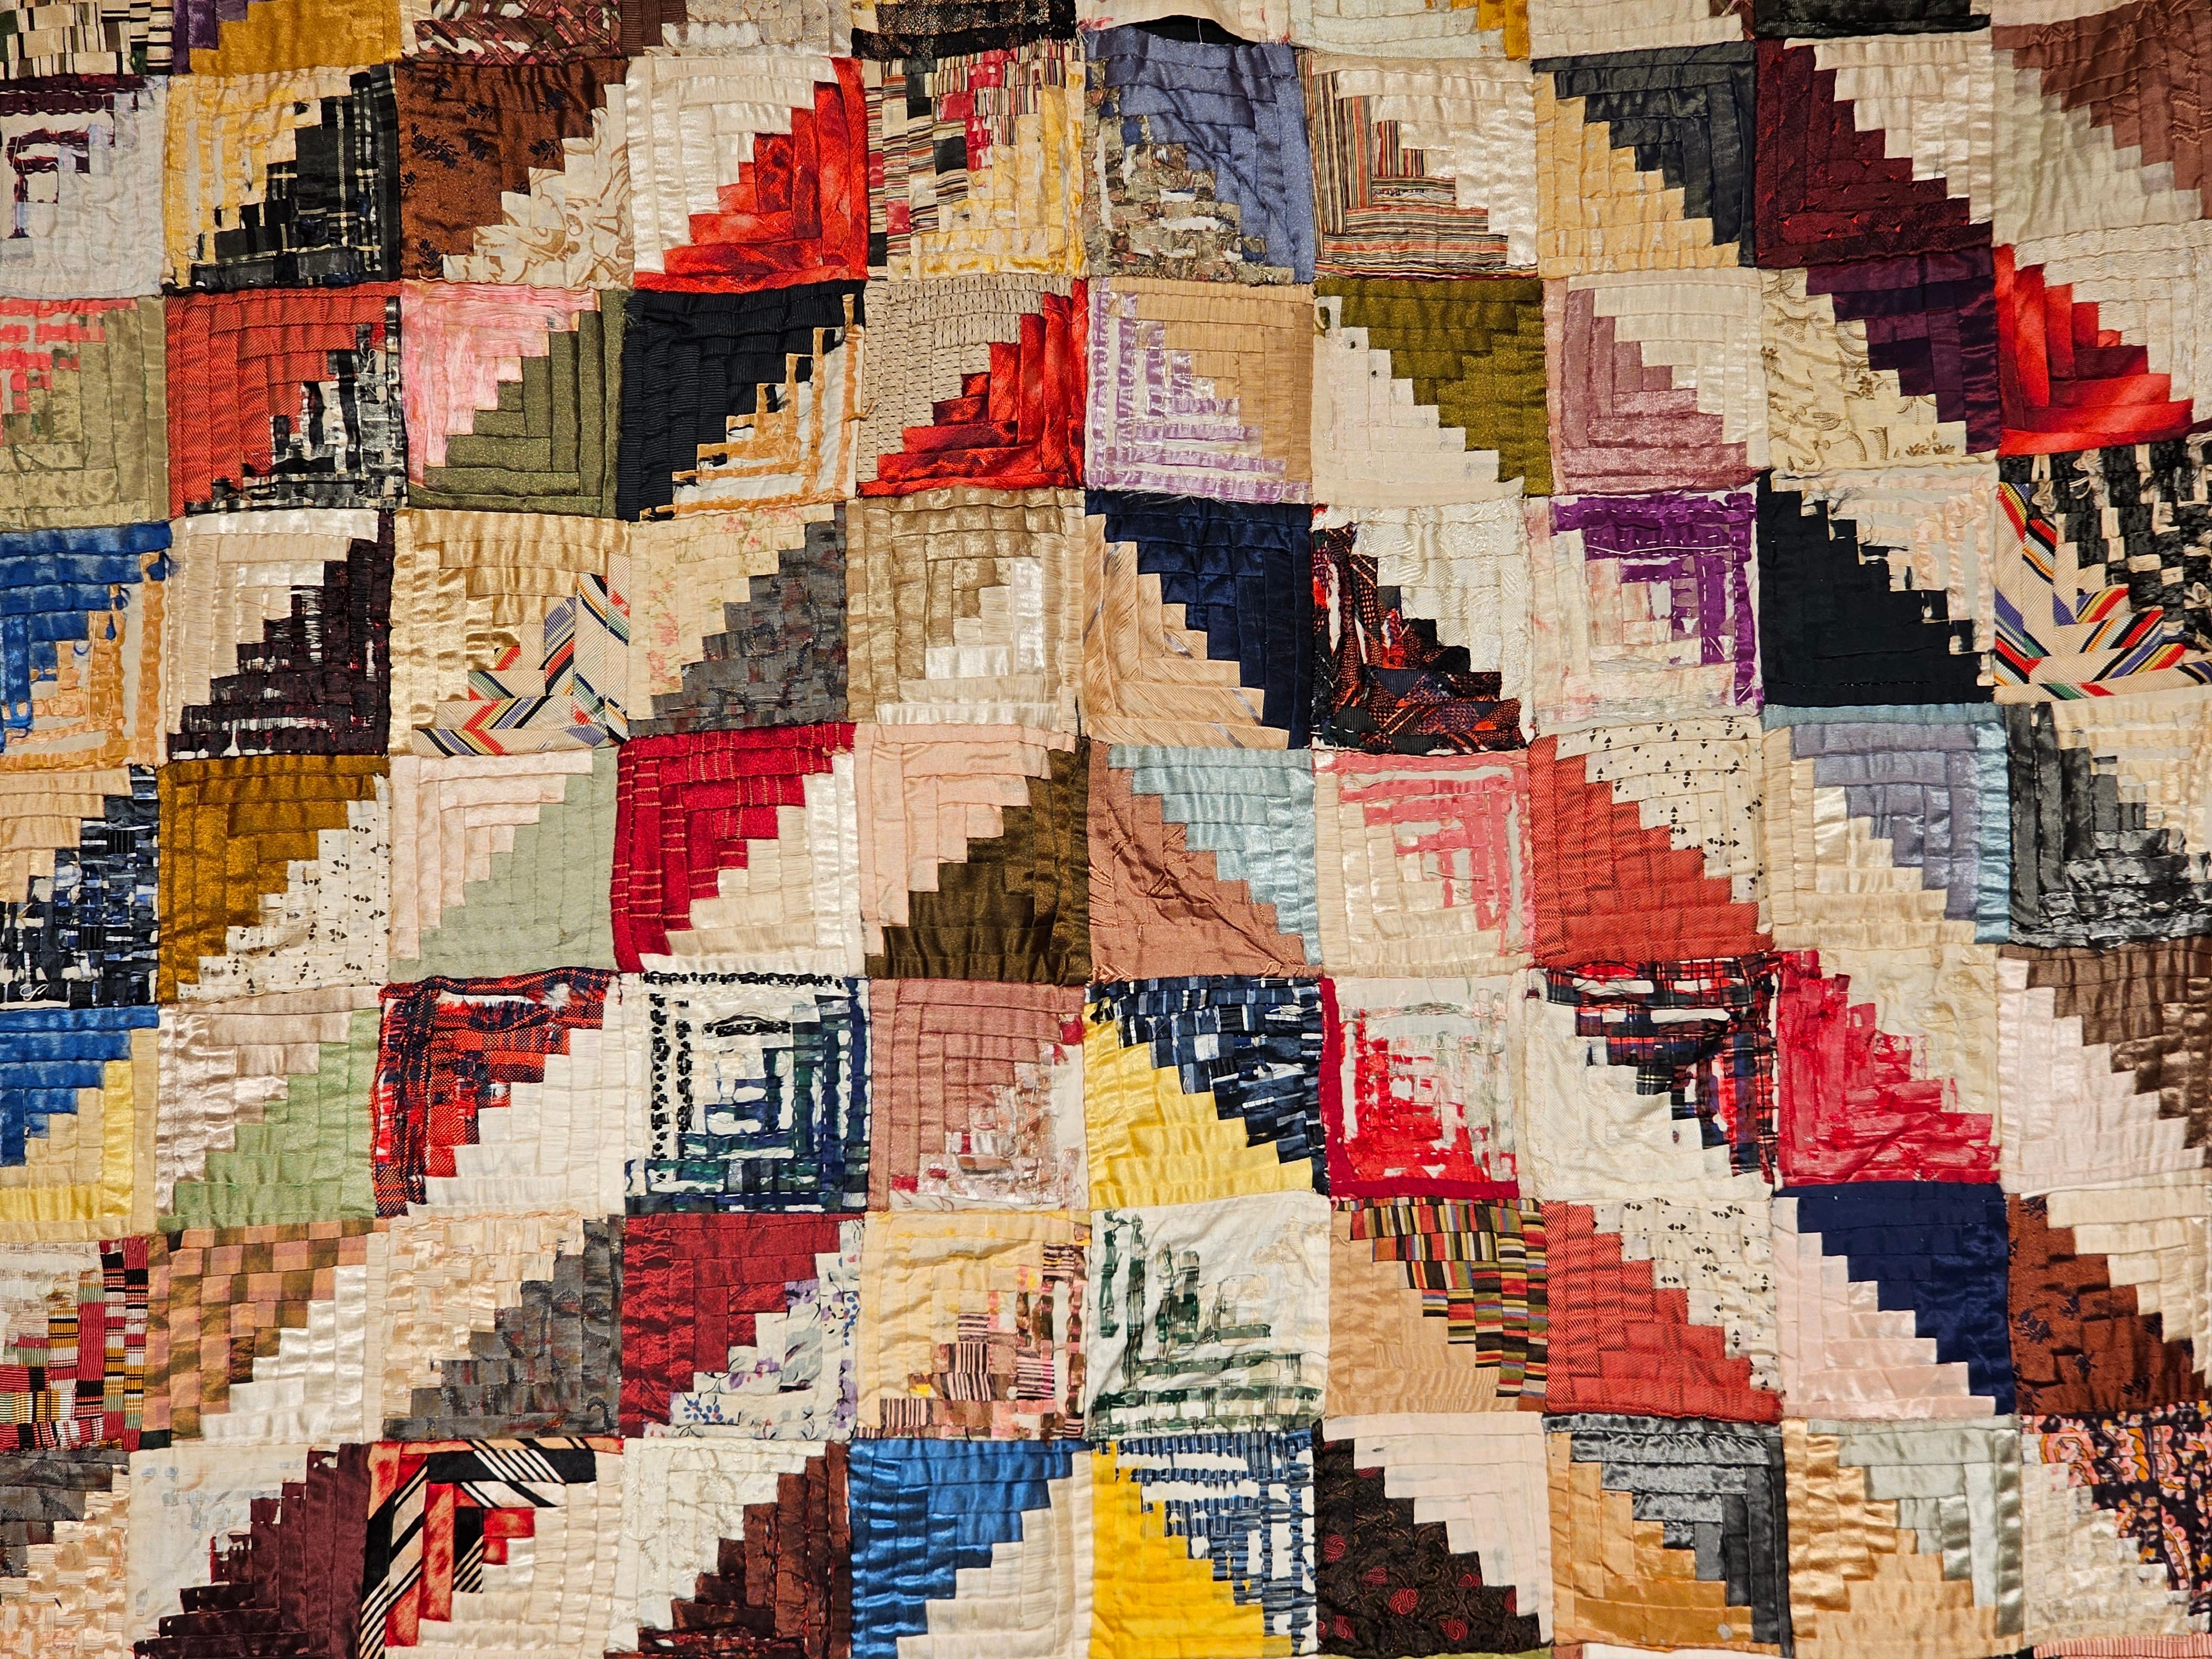 20th Century Hand Stitched American Silk Quilt in “Raising Barn” Pattern Circa the Late 1800s For Sale